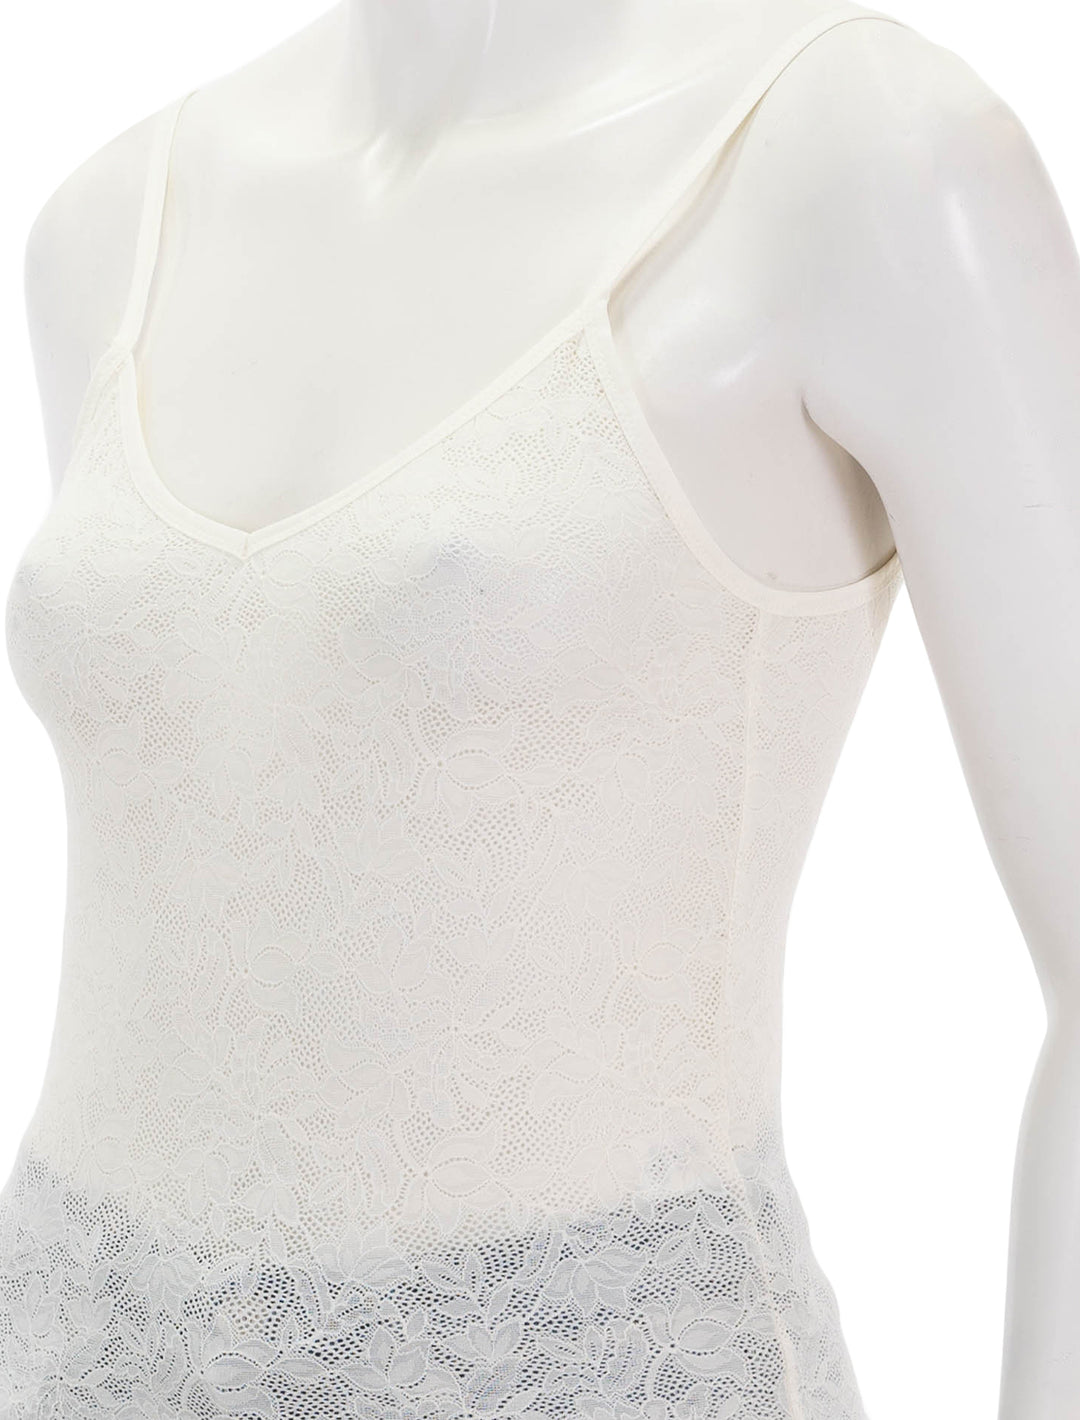 Close-up view of Eberjey's soft stretch recycled lace cami in ivory.